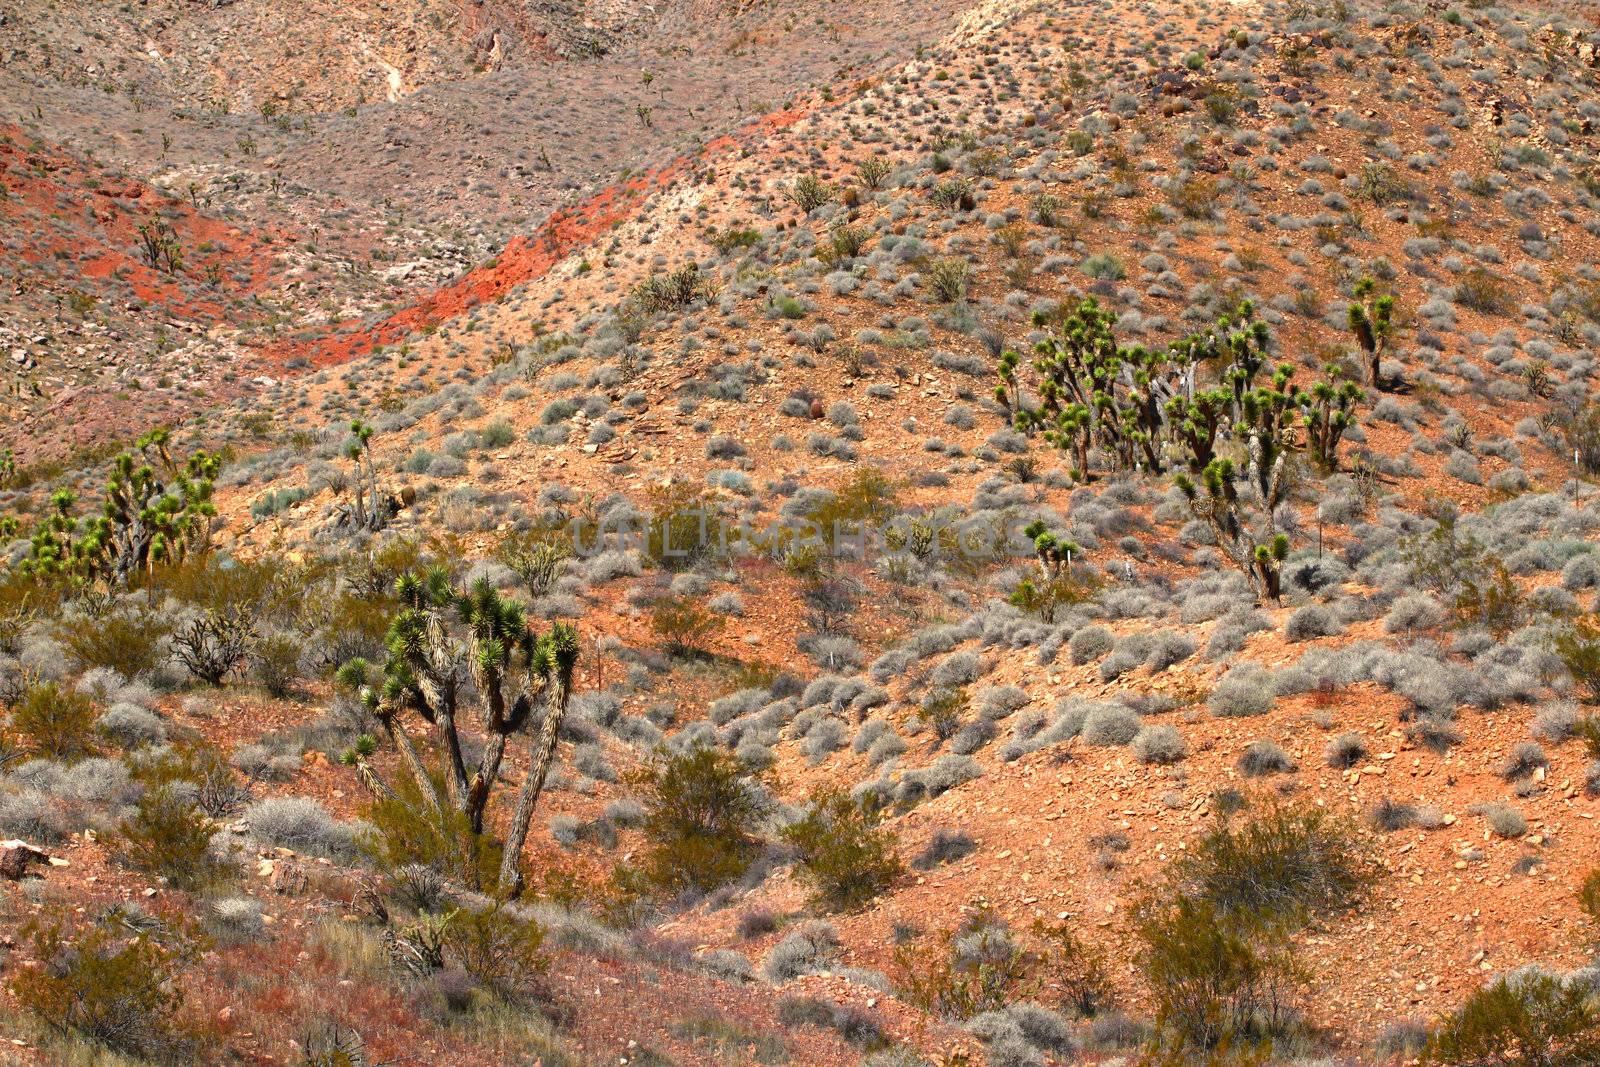 Joshua Trees scattered amongst a rugged desert at Beaver Dam Mountains Wilderness Area.